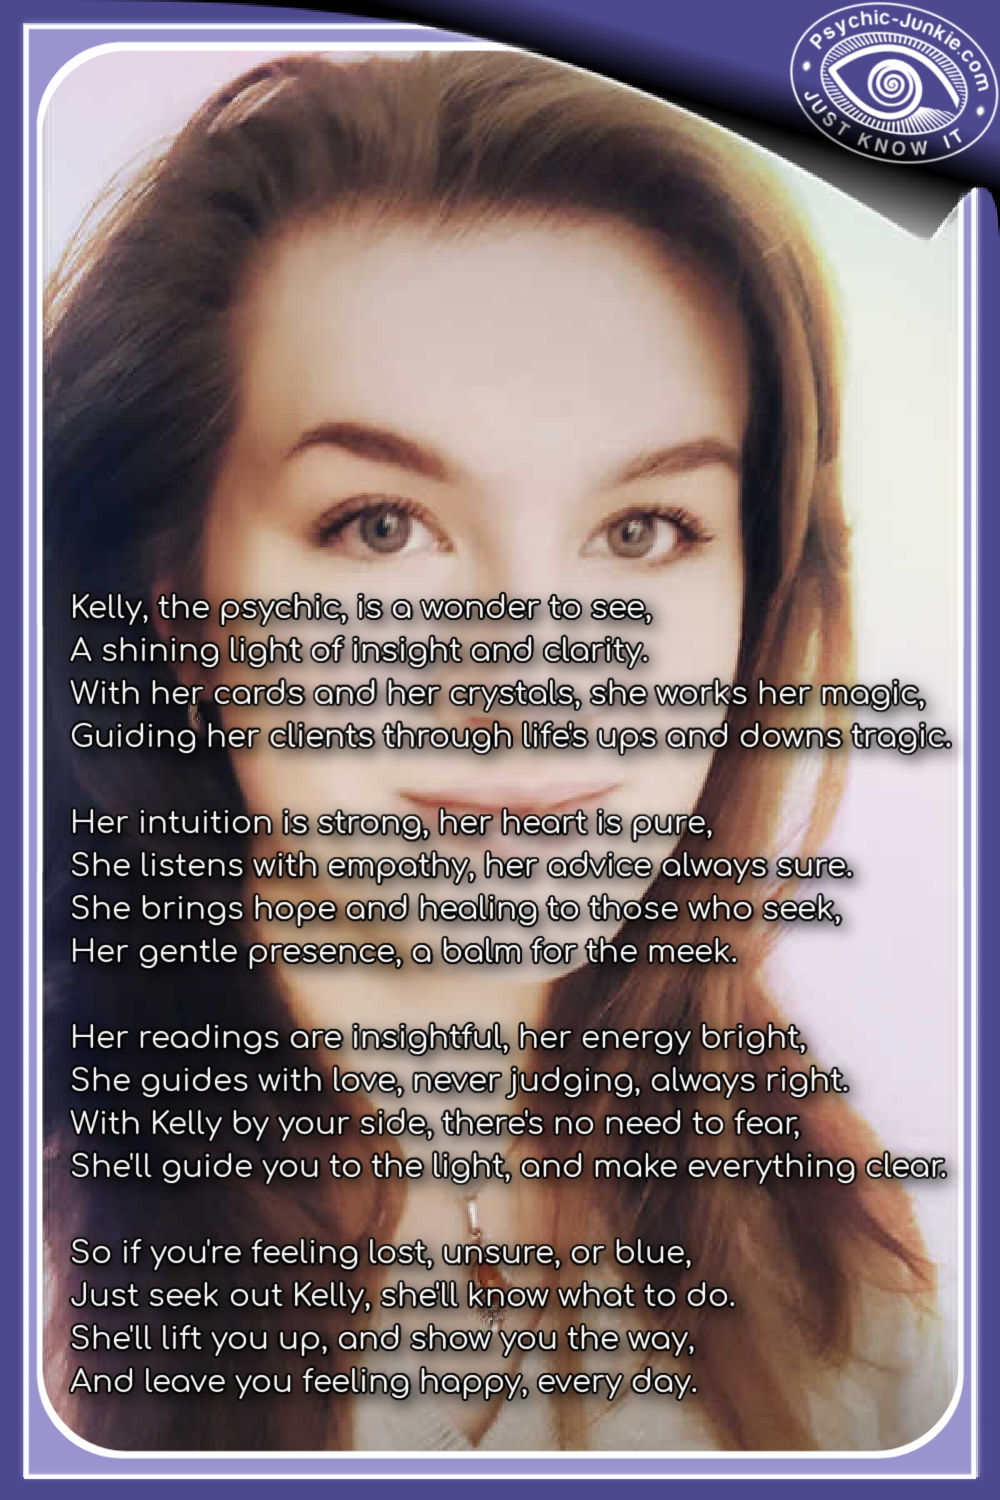 Psychic Interviews - Readings By Kelley